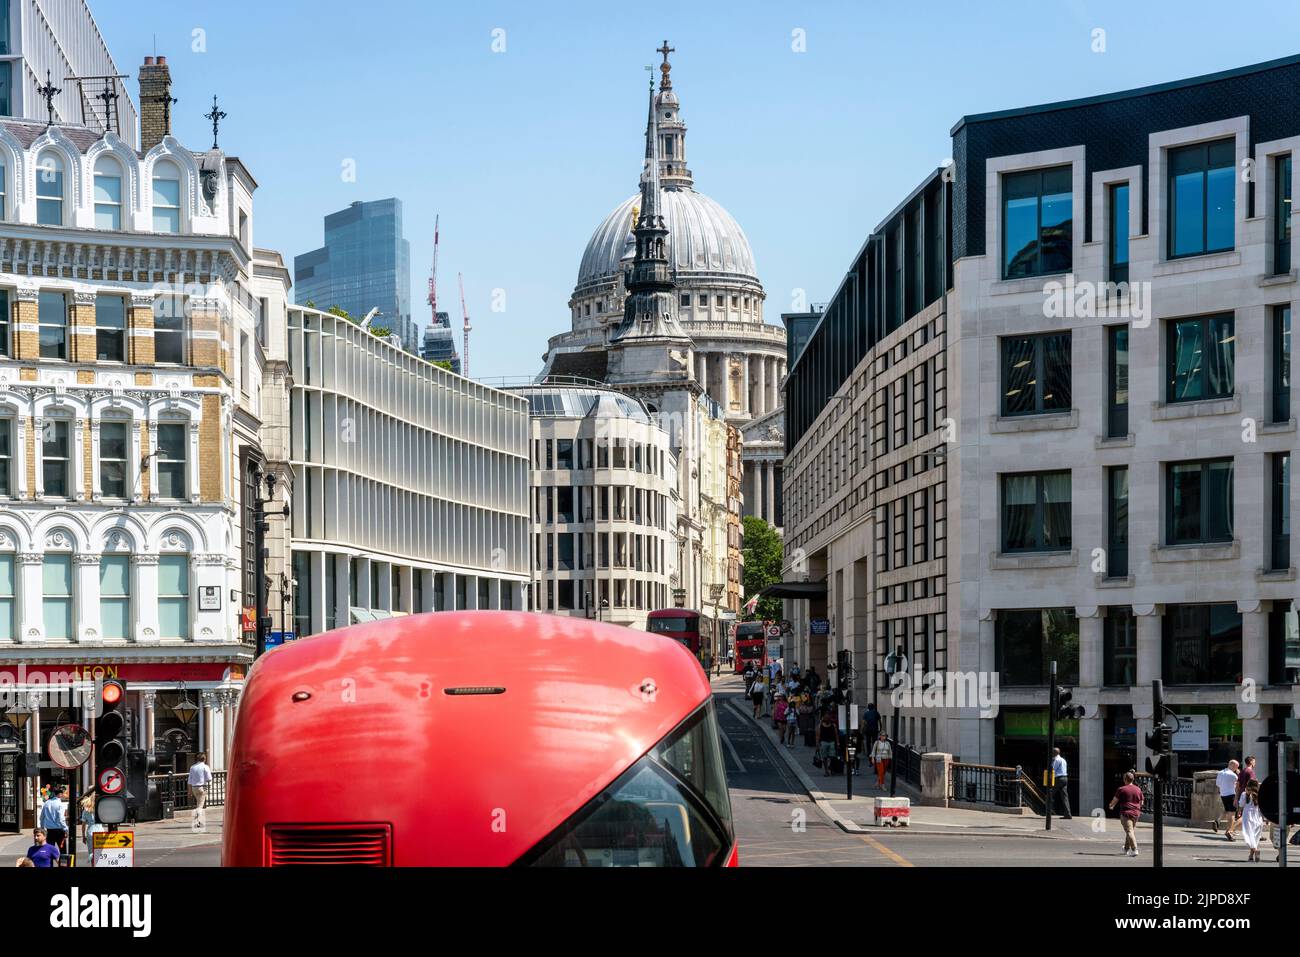 A Red London Bus Travels Along Fleet Street With A View Of St Paul's Cathedral In The Distance, London, UK. Stock Photo